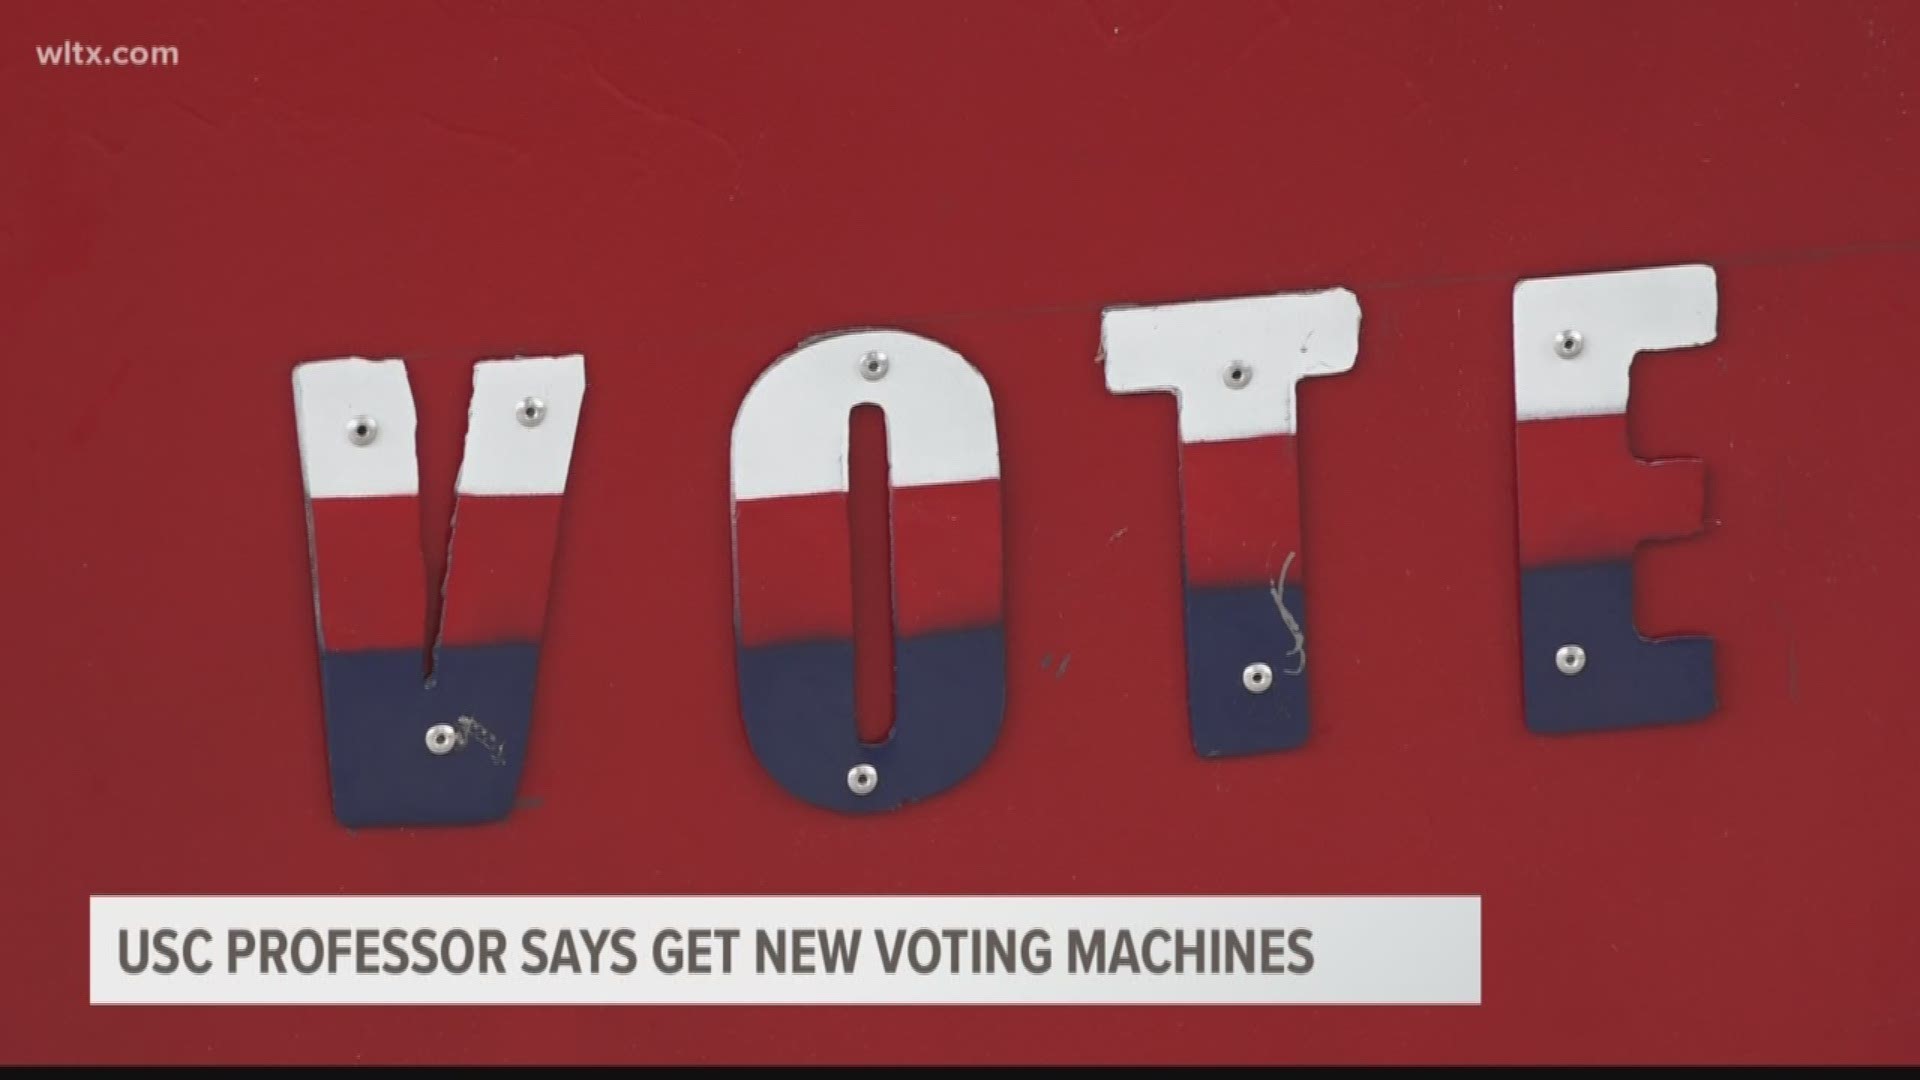 Earlier this week WLTX reported on voting equipment issues in Richland county.